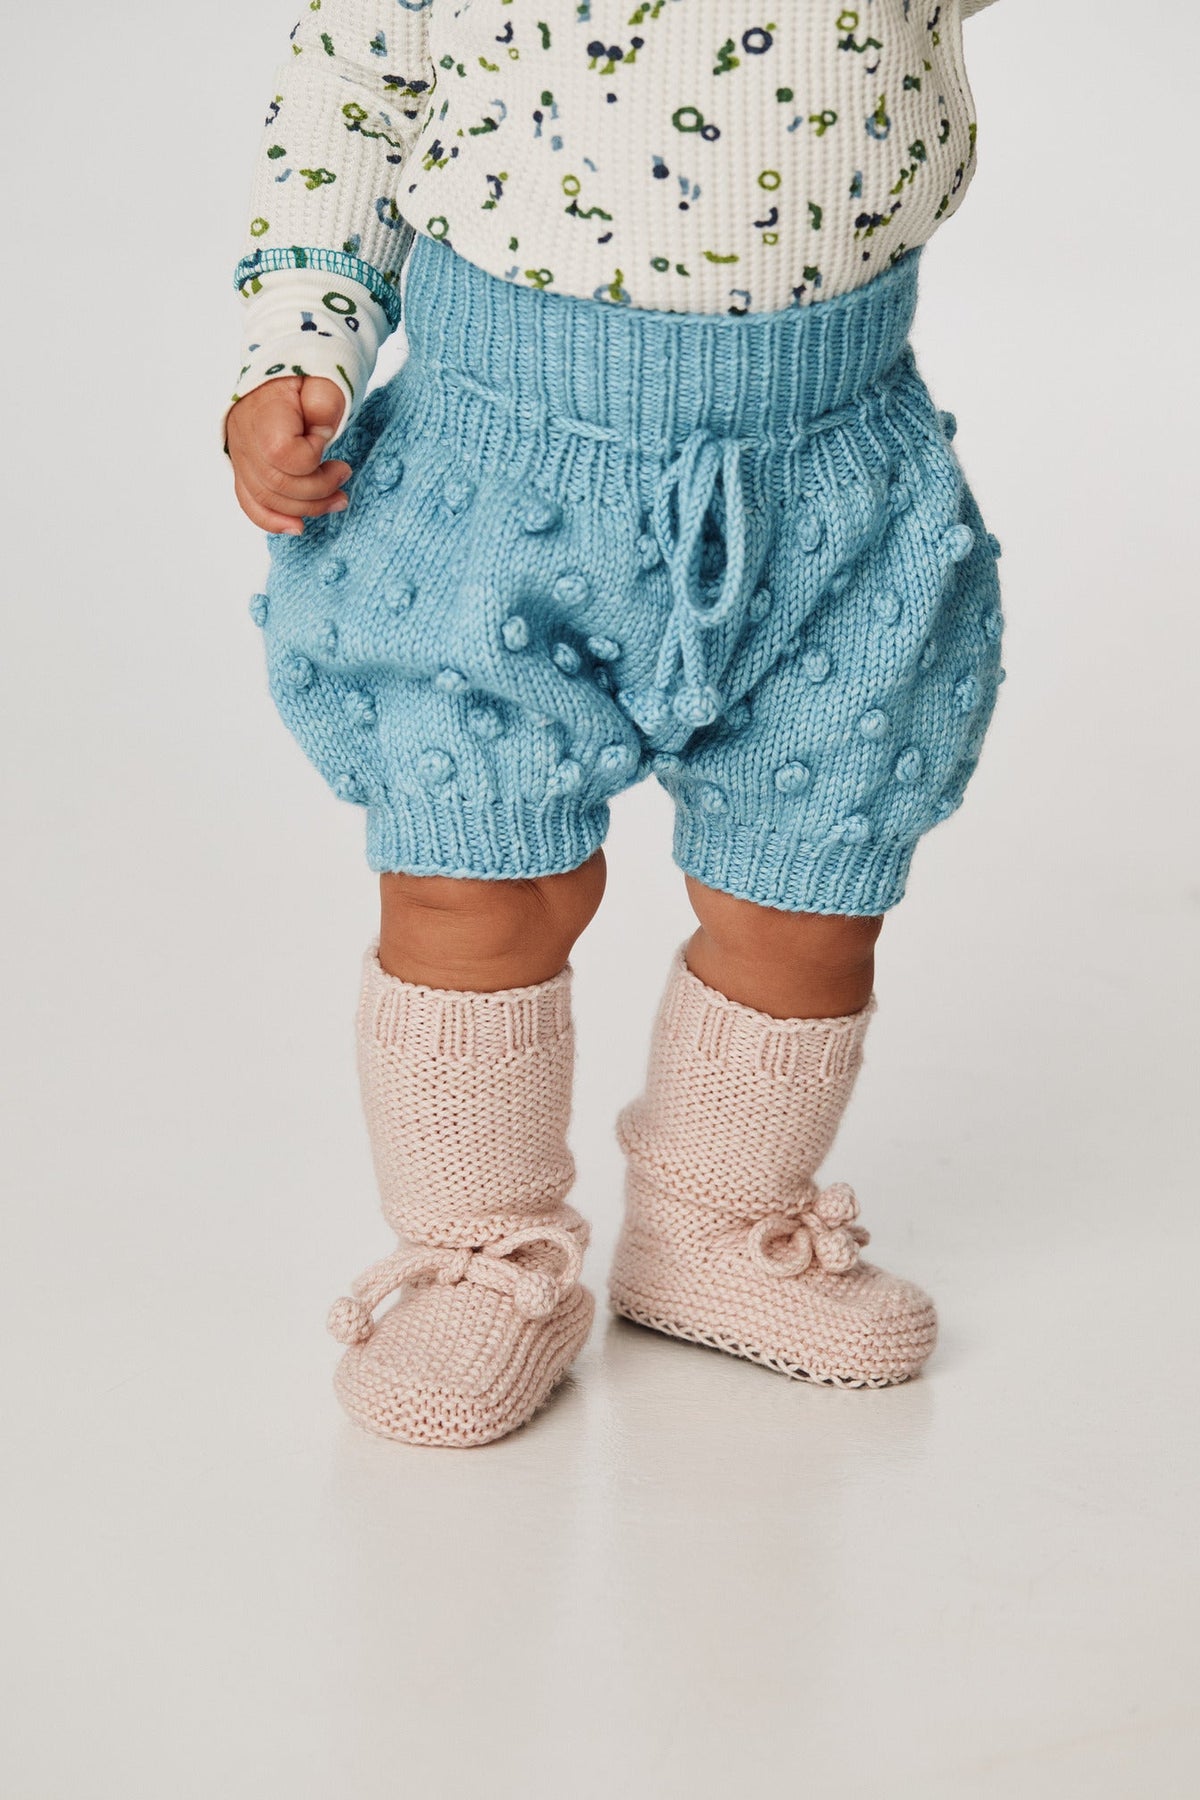 Popcorn Bloomer - Faded Denim+Model is 19 inches tall, 27lbs, wearing a size 12-18m